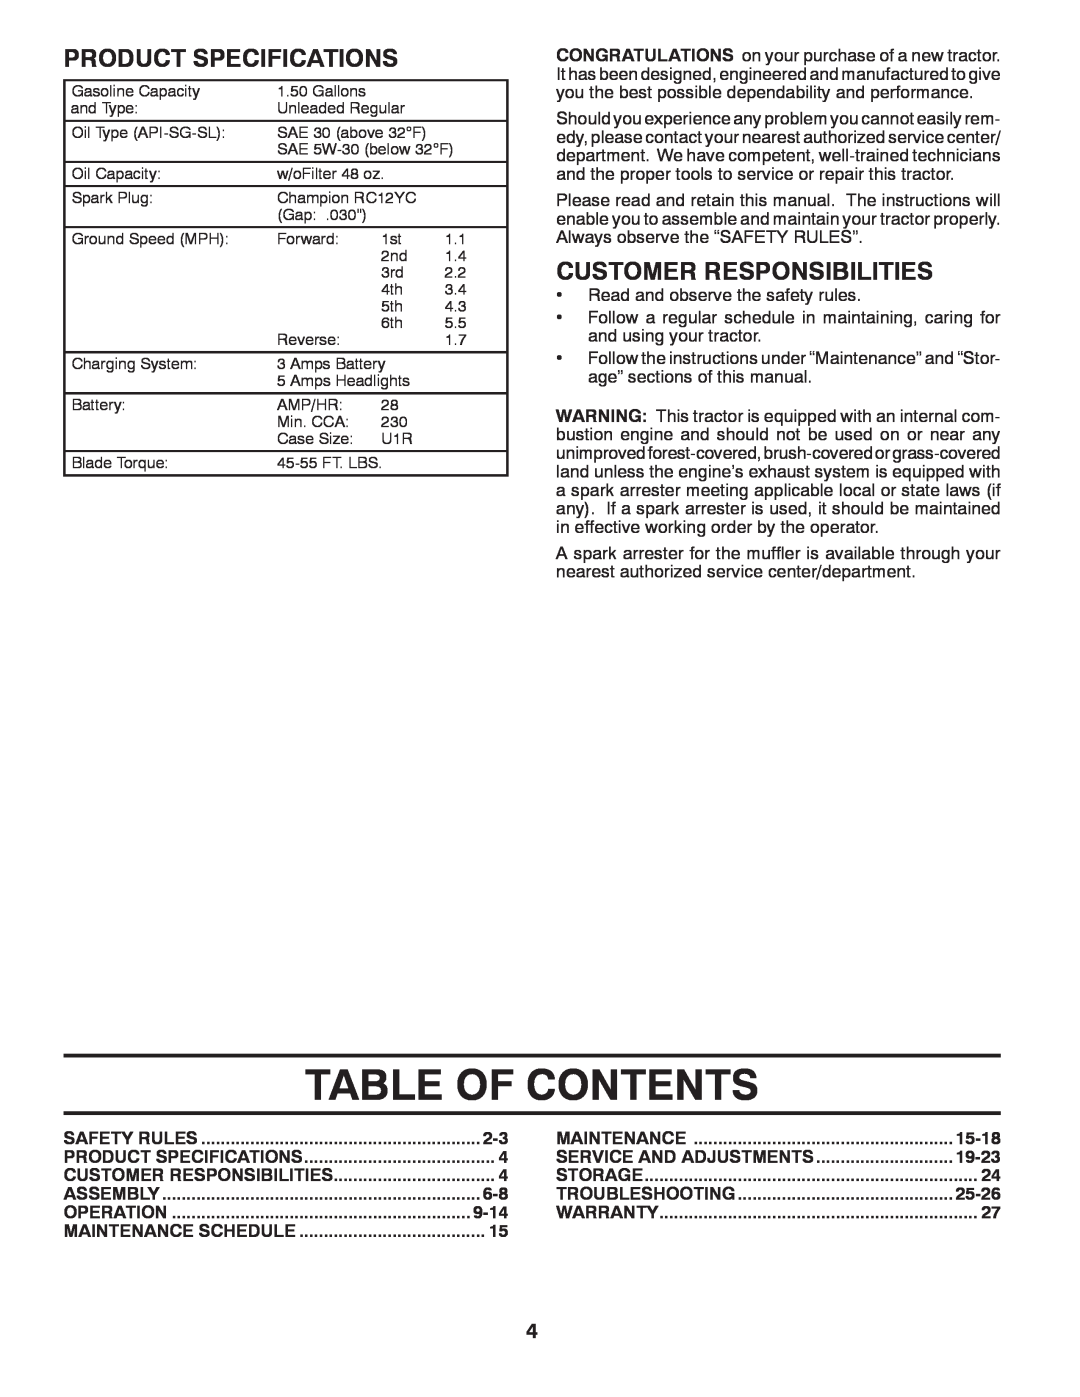 Poulan 532 43 88-98, 96018000400 manual Table Of Contents, Product Specifications, Customer Responsibilities 